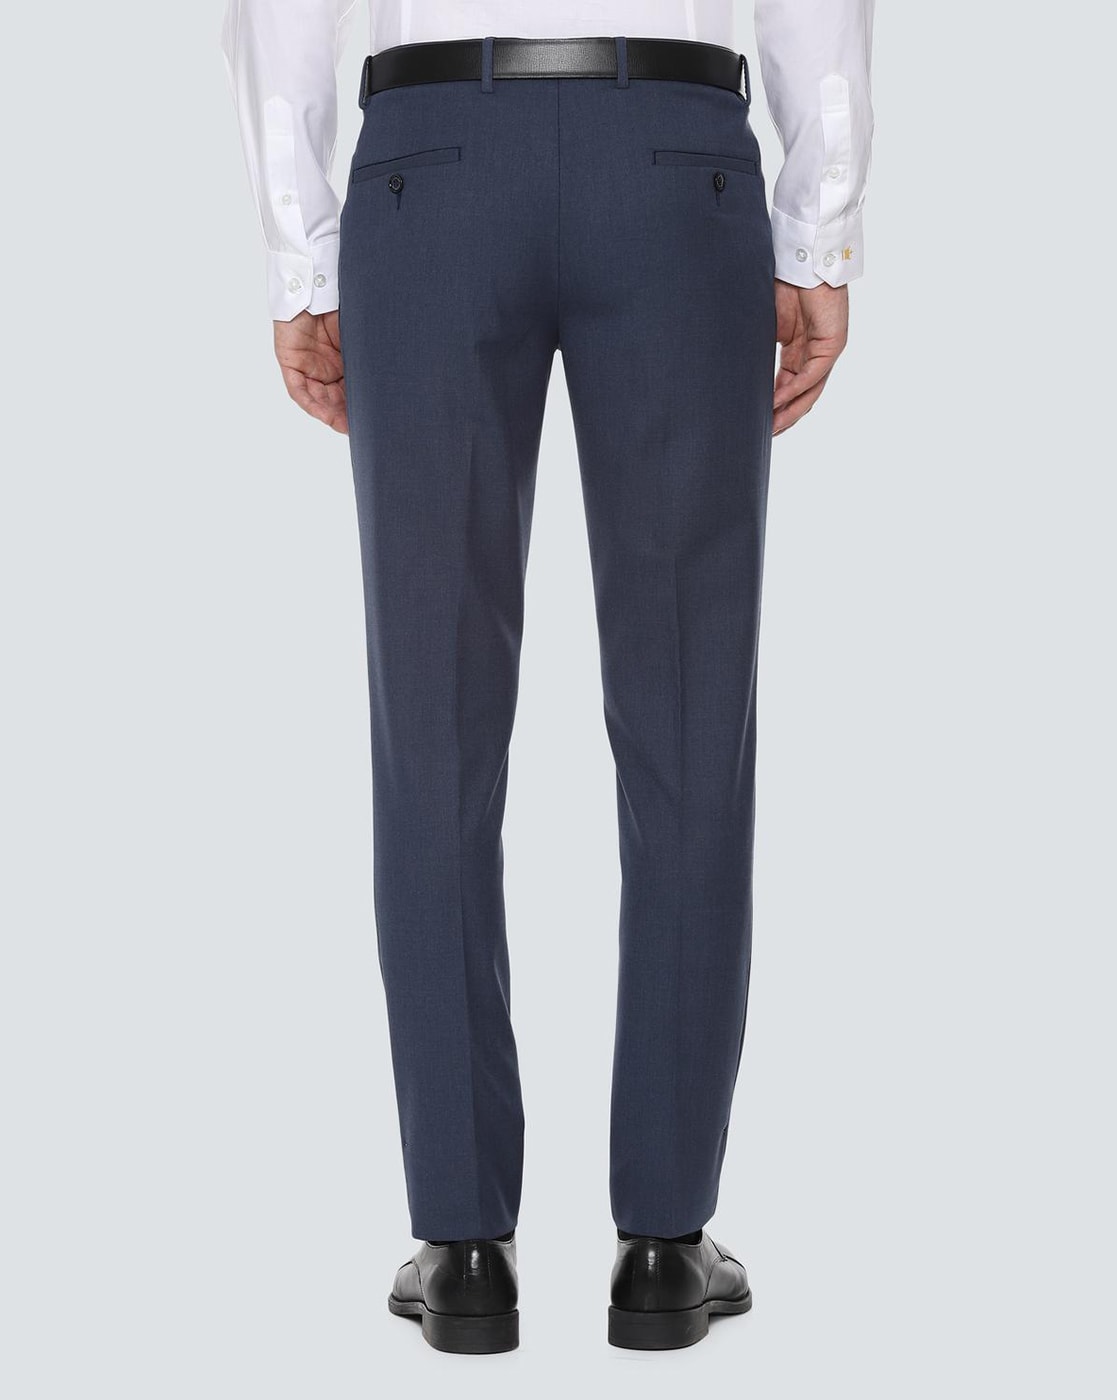 Buy LOUIS PHILIPPE Black Men's Slim Fit Structured Trousers | Shoppers Stop